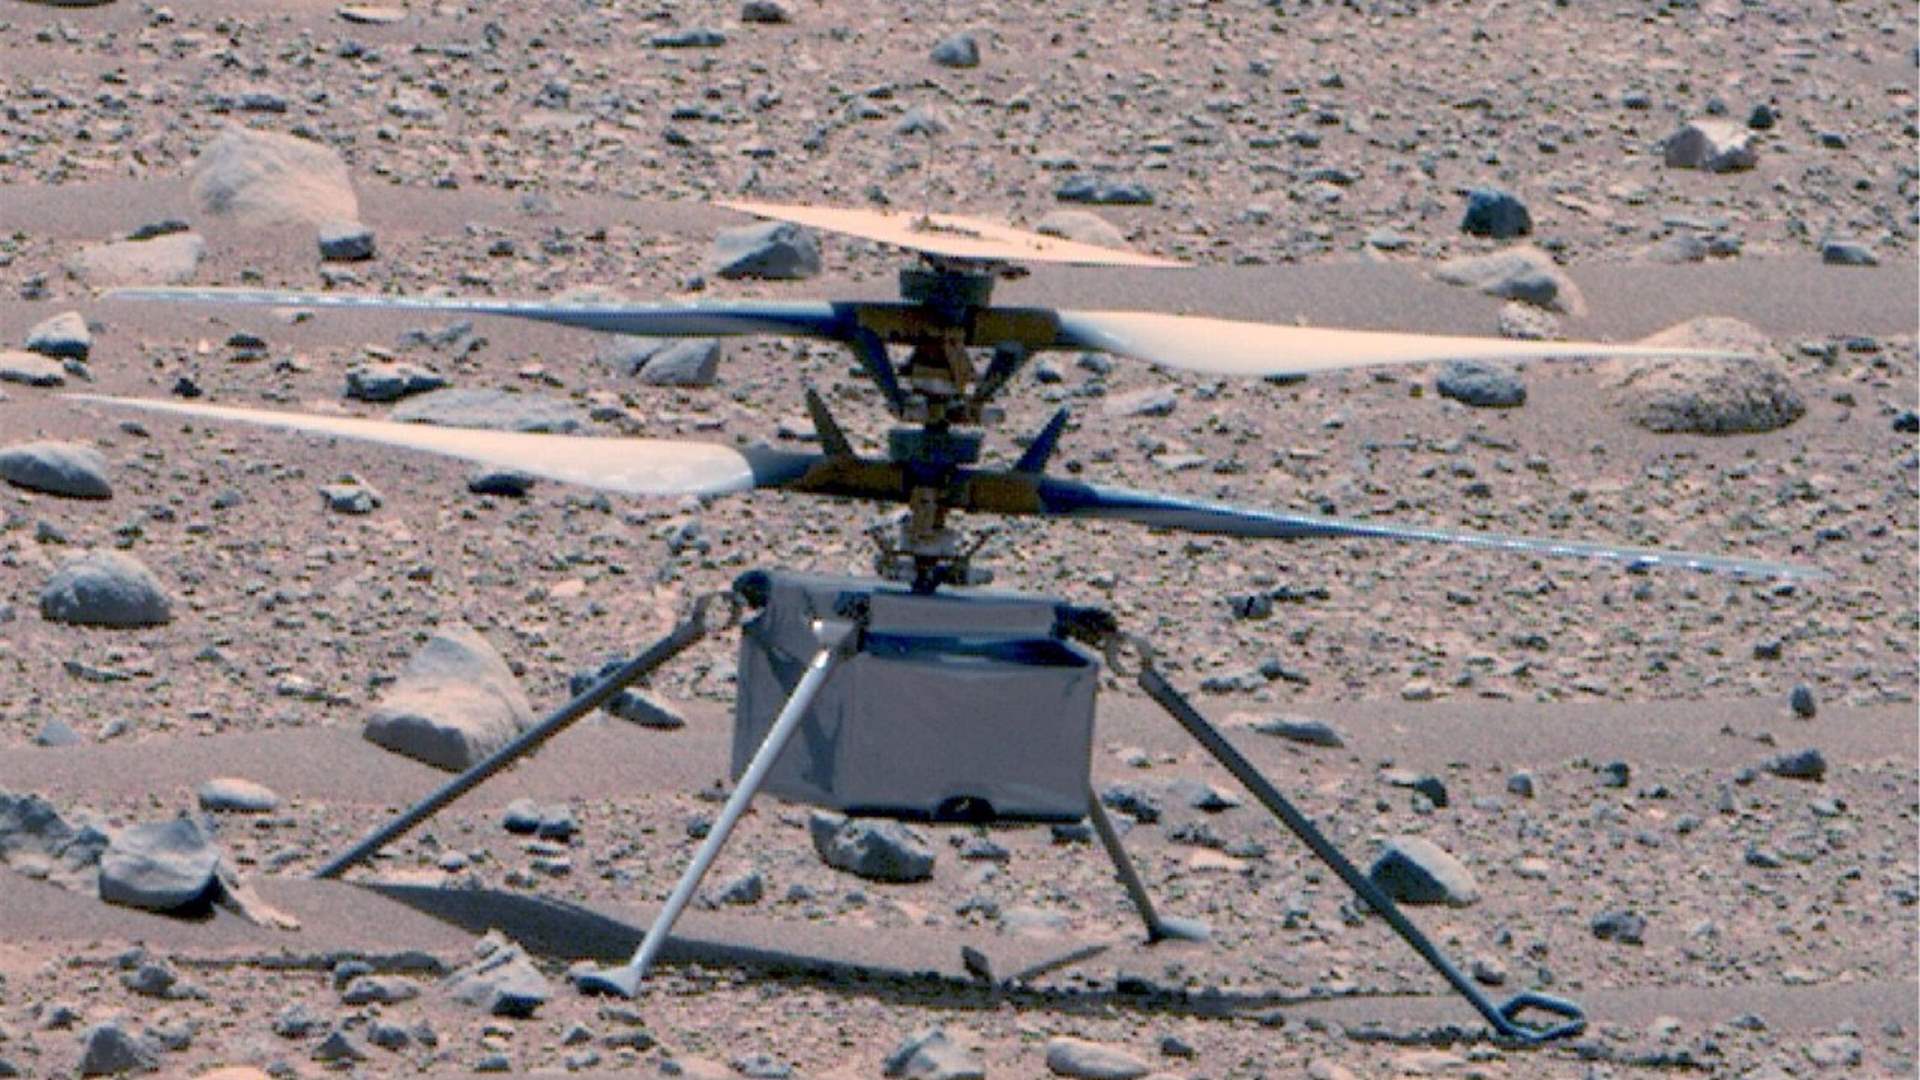 NASA&#39;s Mars helicopter &#39;phones home&#39; after no contact for 63 days